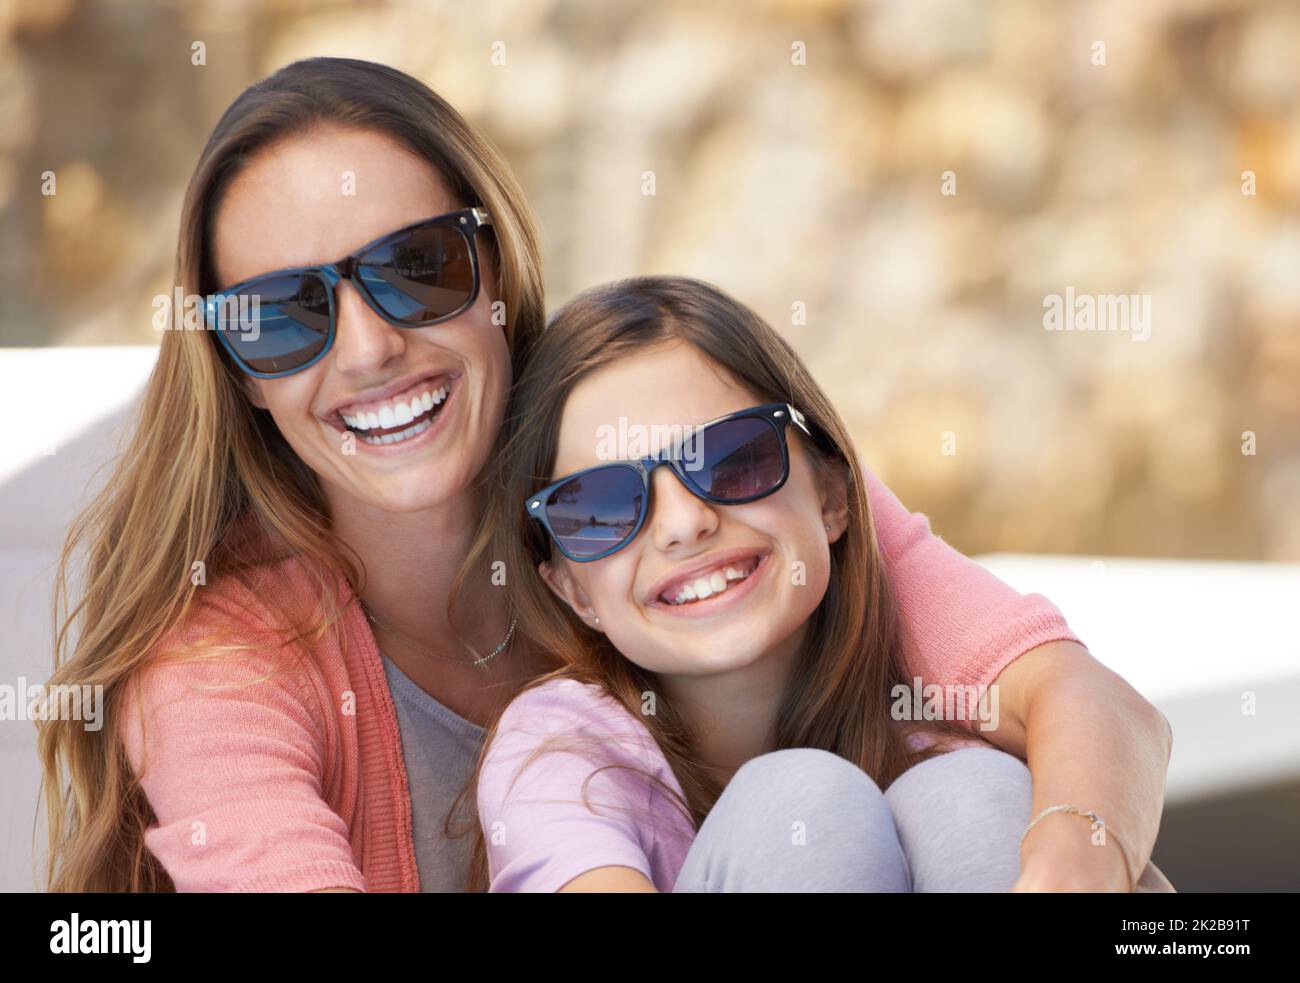 Two of a kind. Portrait of a mother and daughter spending time together in the outdoors. Stock Photo